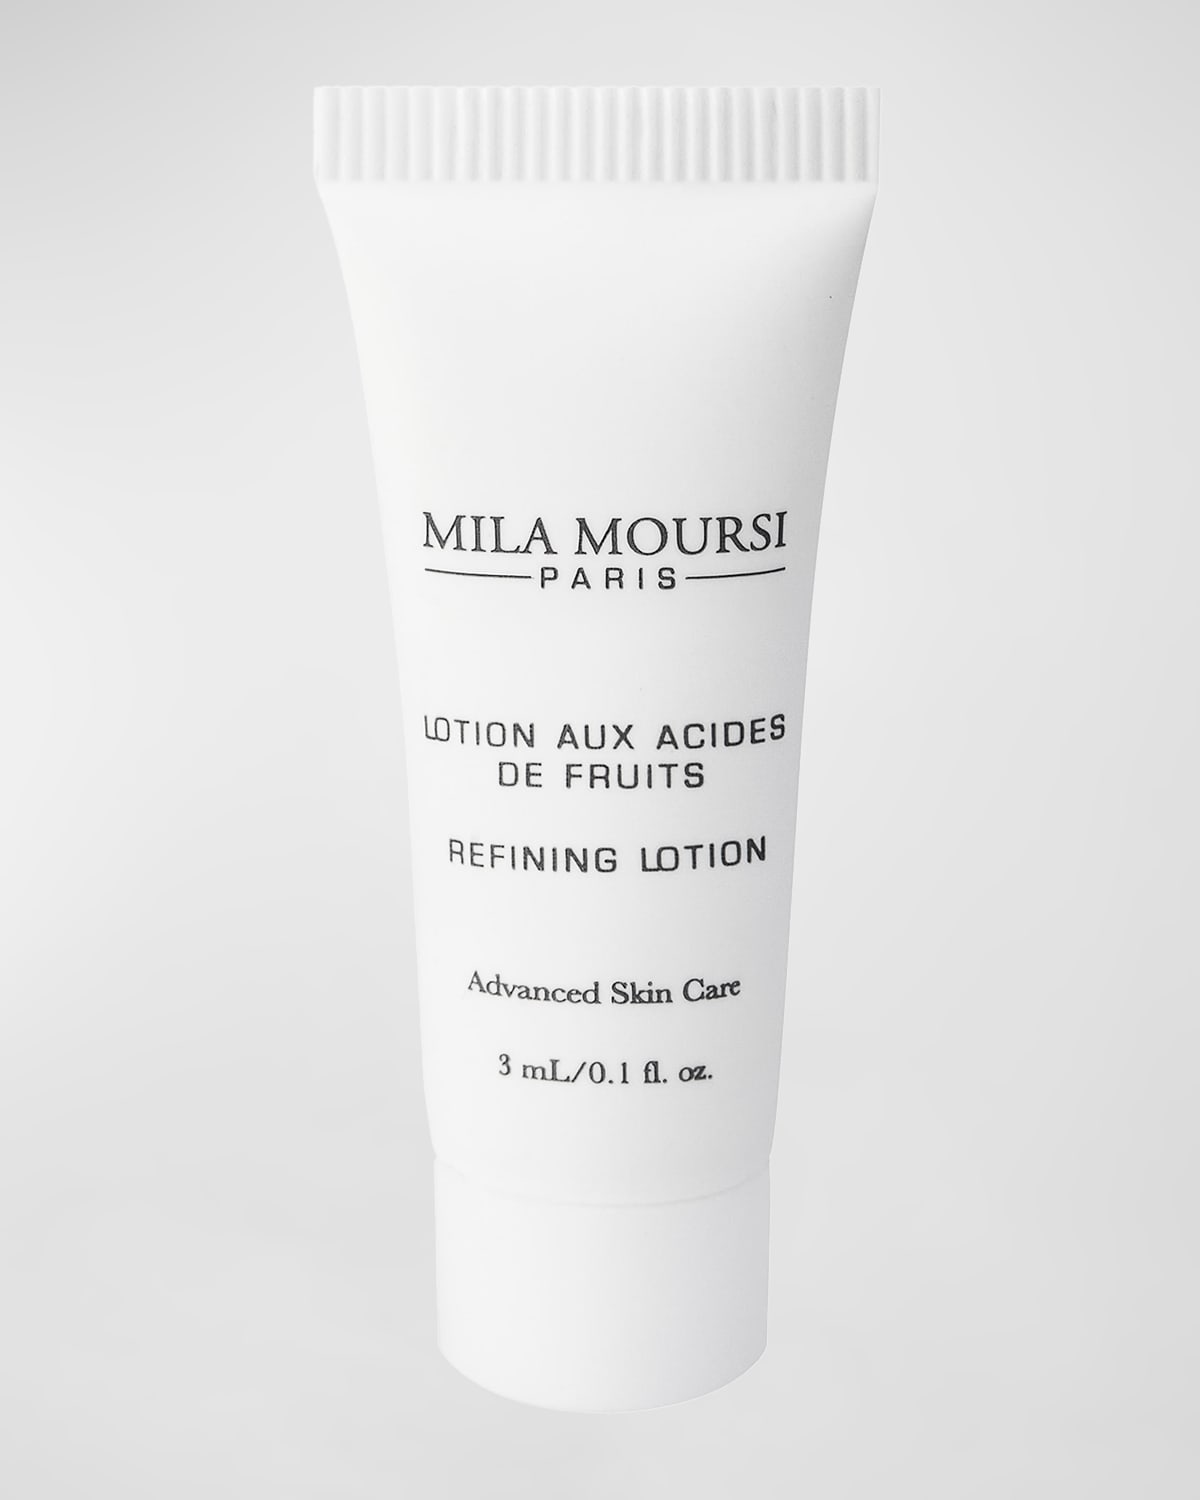 Mila Moursi 3 mL Refining Lotion, Yours with any $75 Mila Moursi Purchase